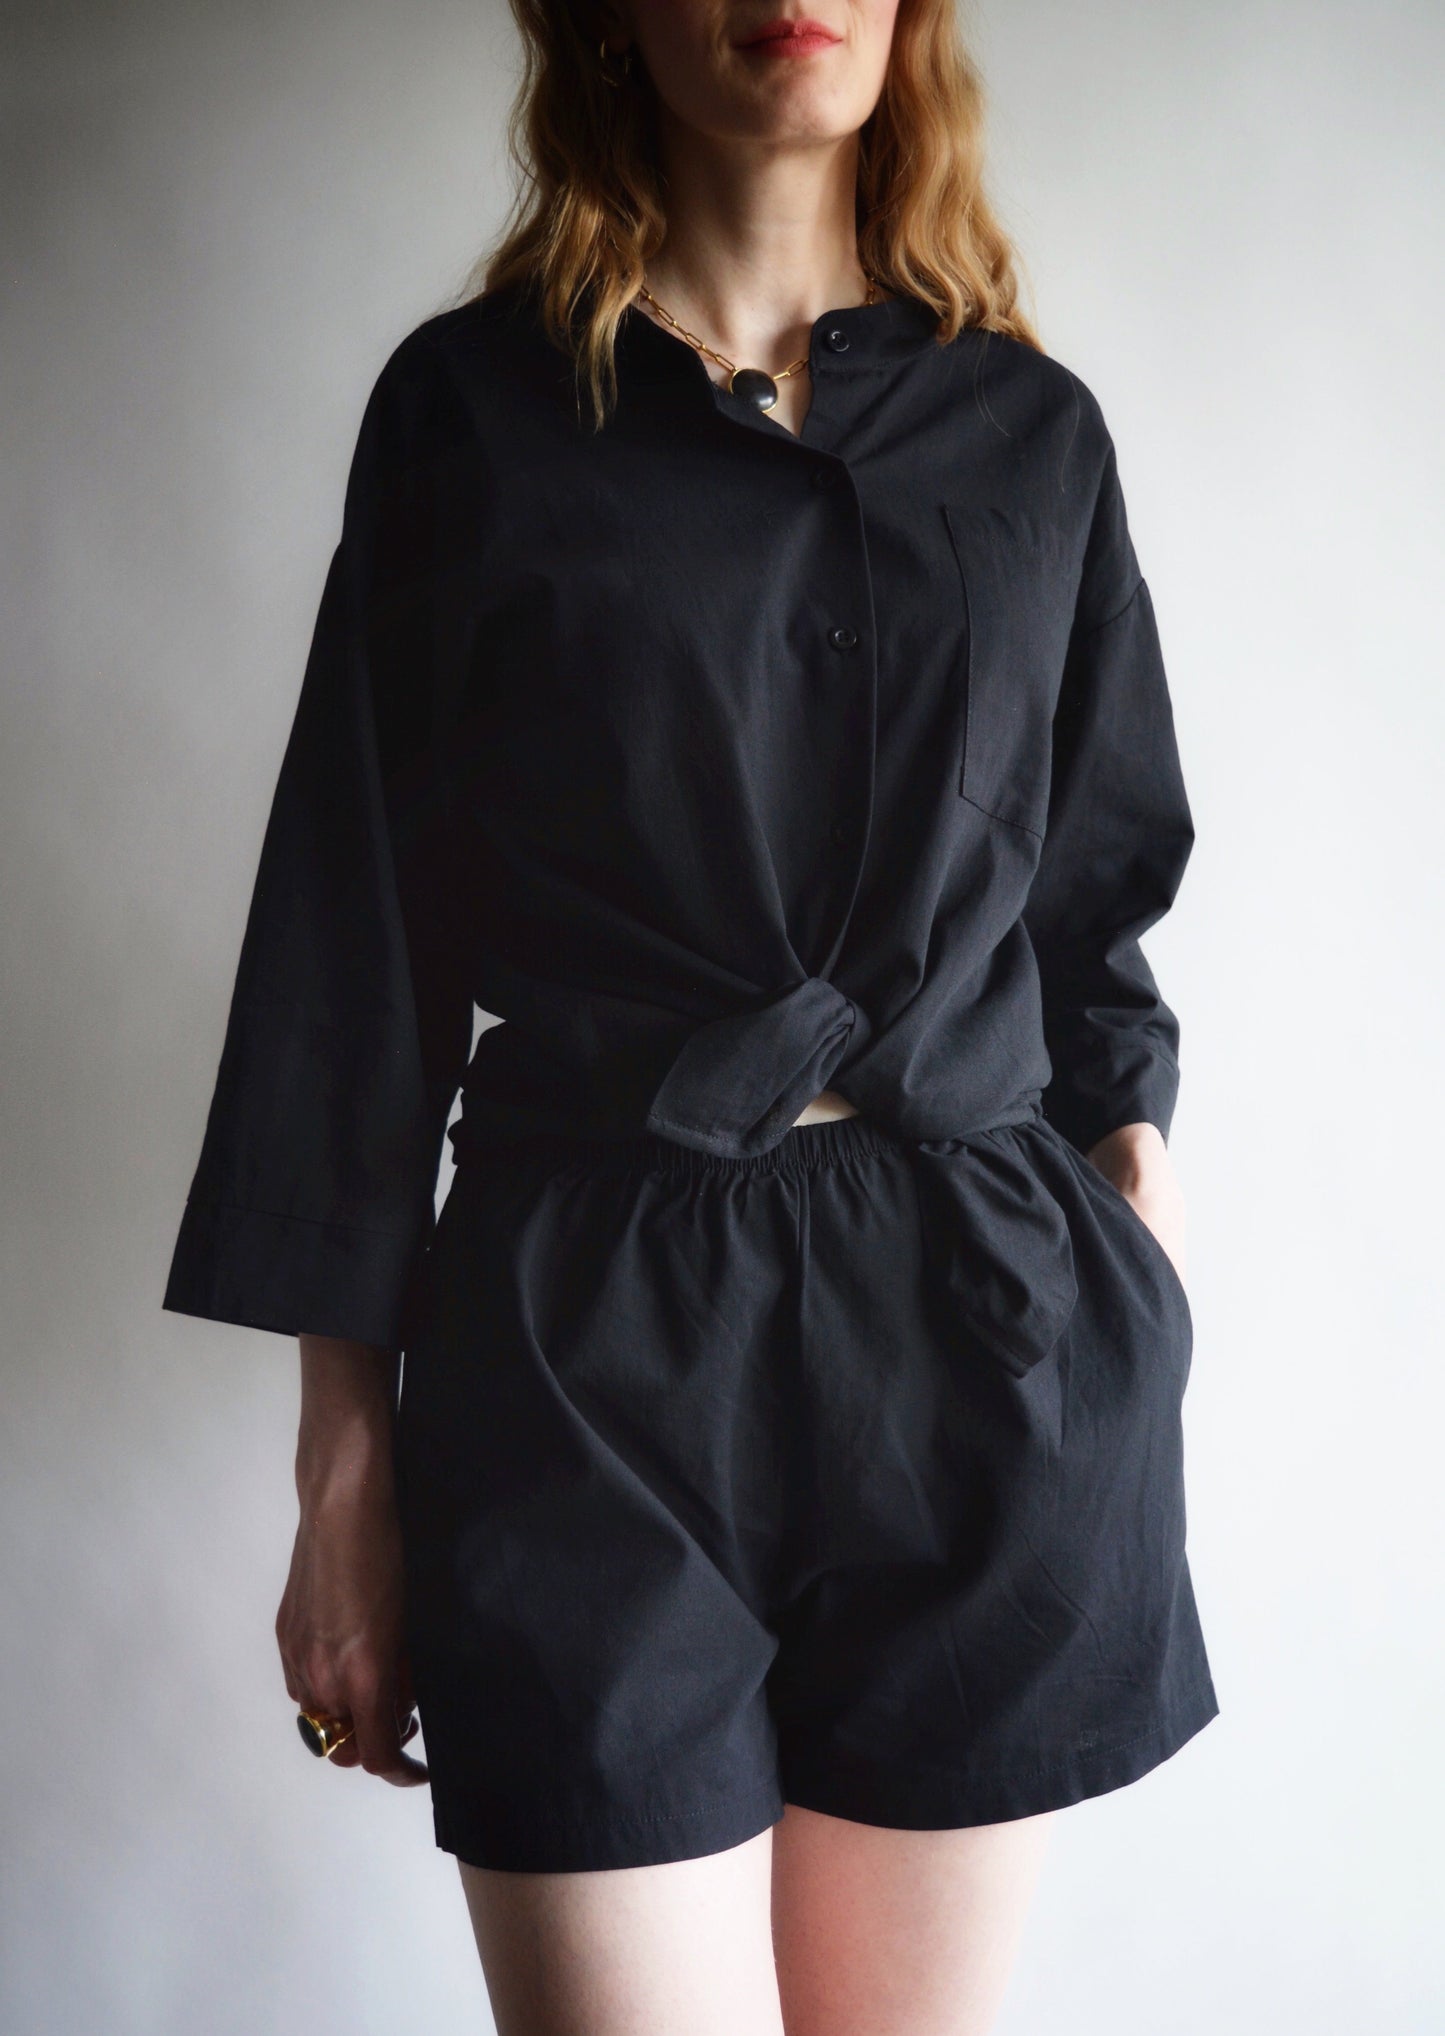 Two Piece Set - Cotton Shirt and Shorts in black color